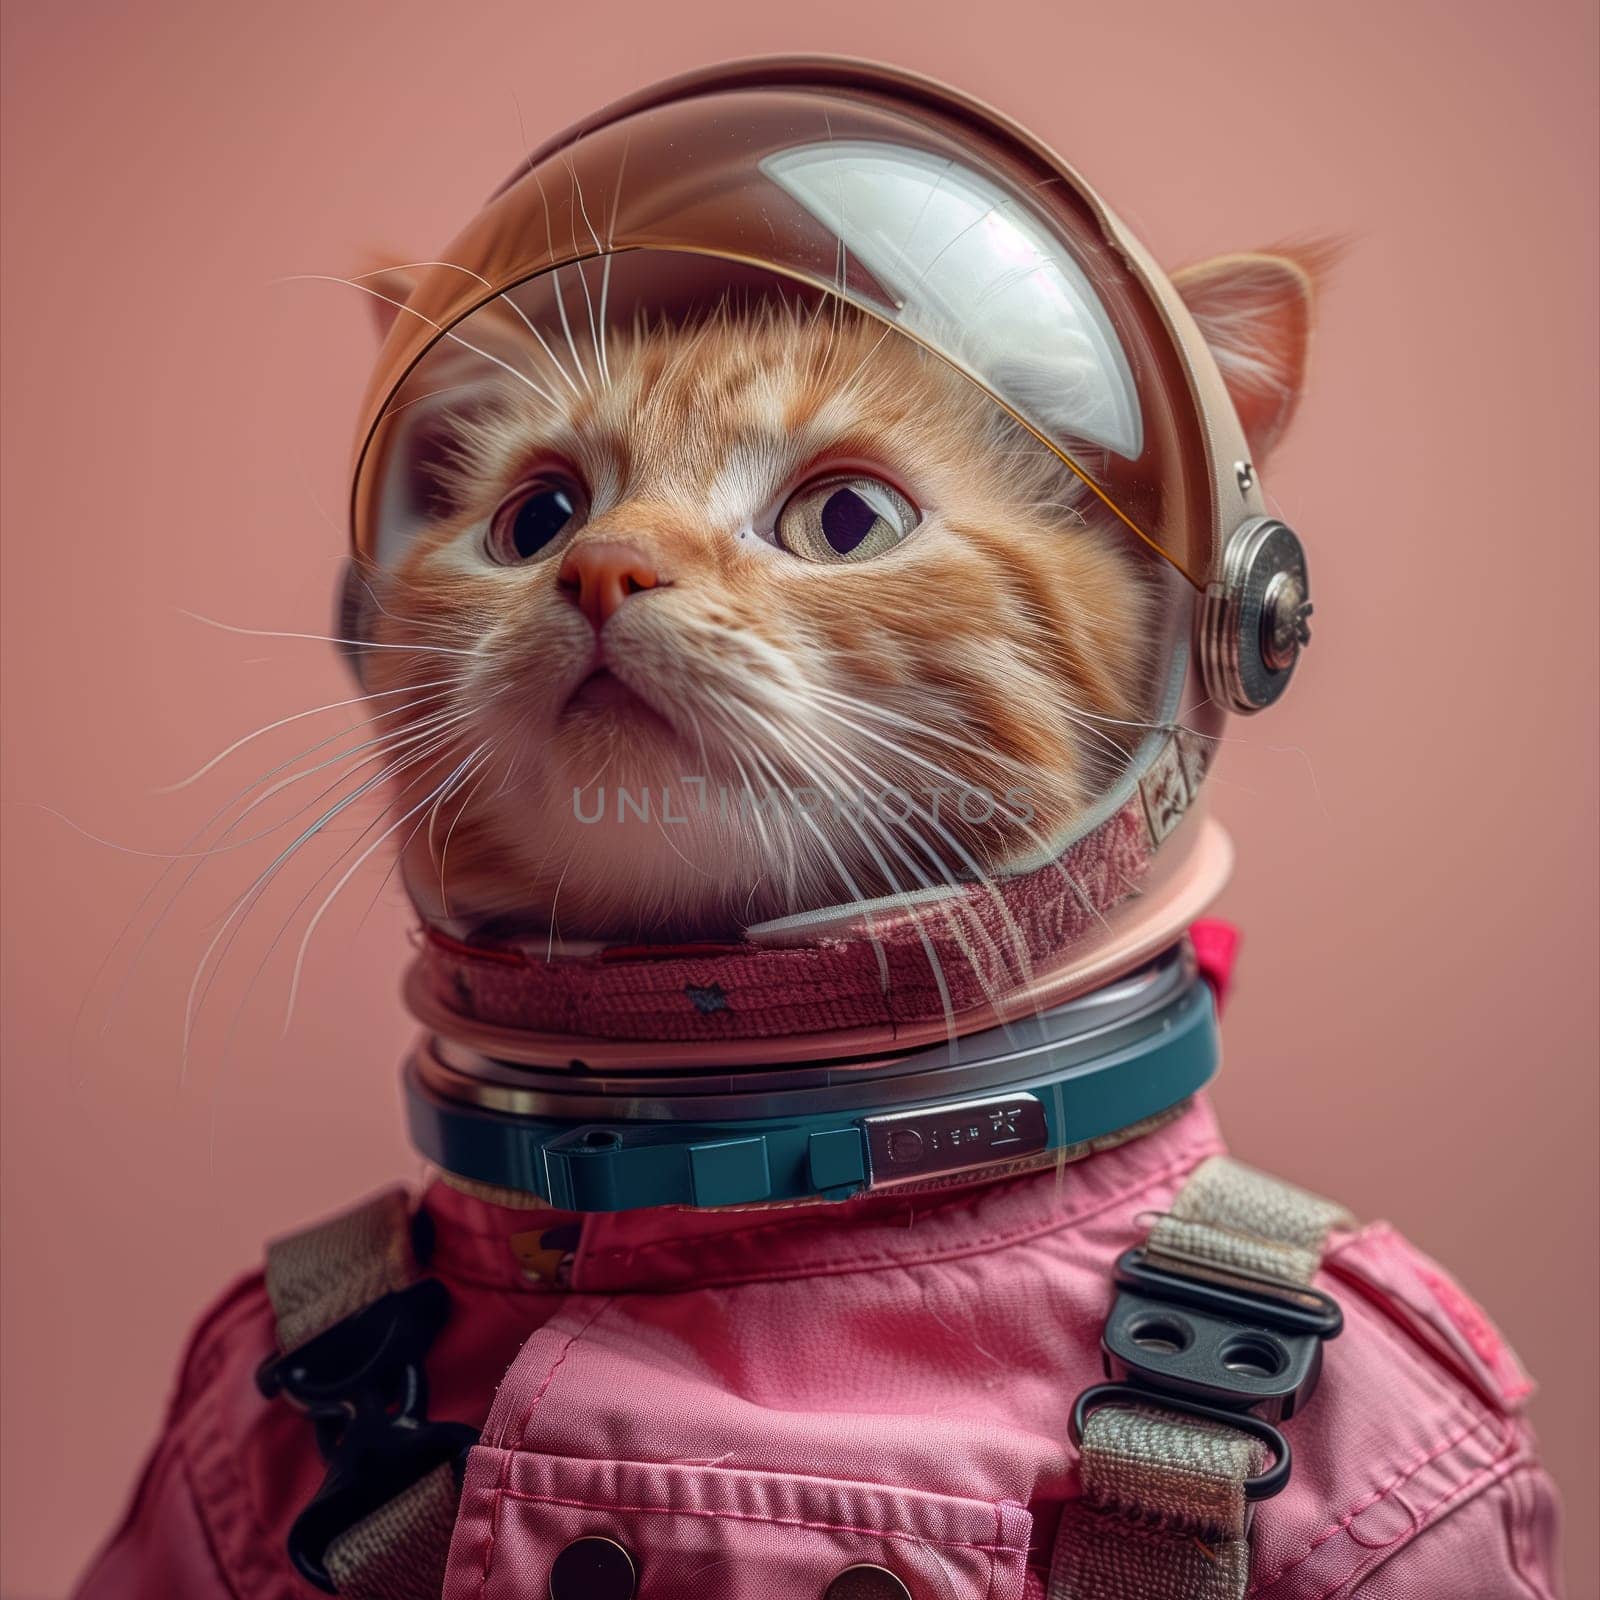 Felidae Carnivore wearing a pink space suit and helmet by richwolf